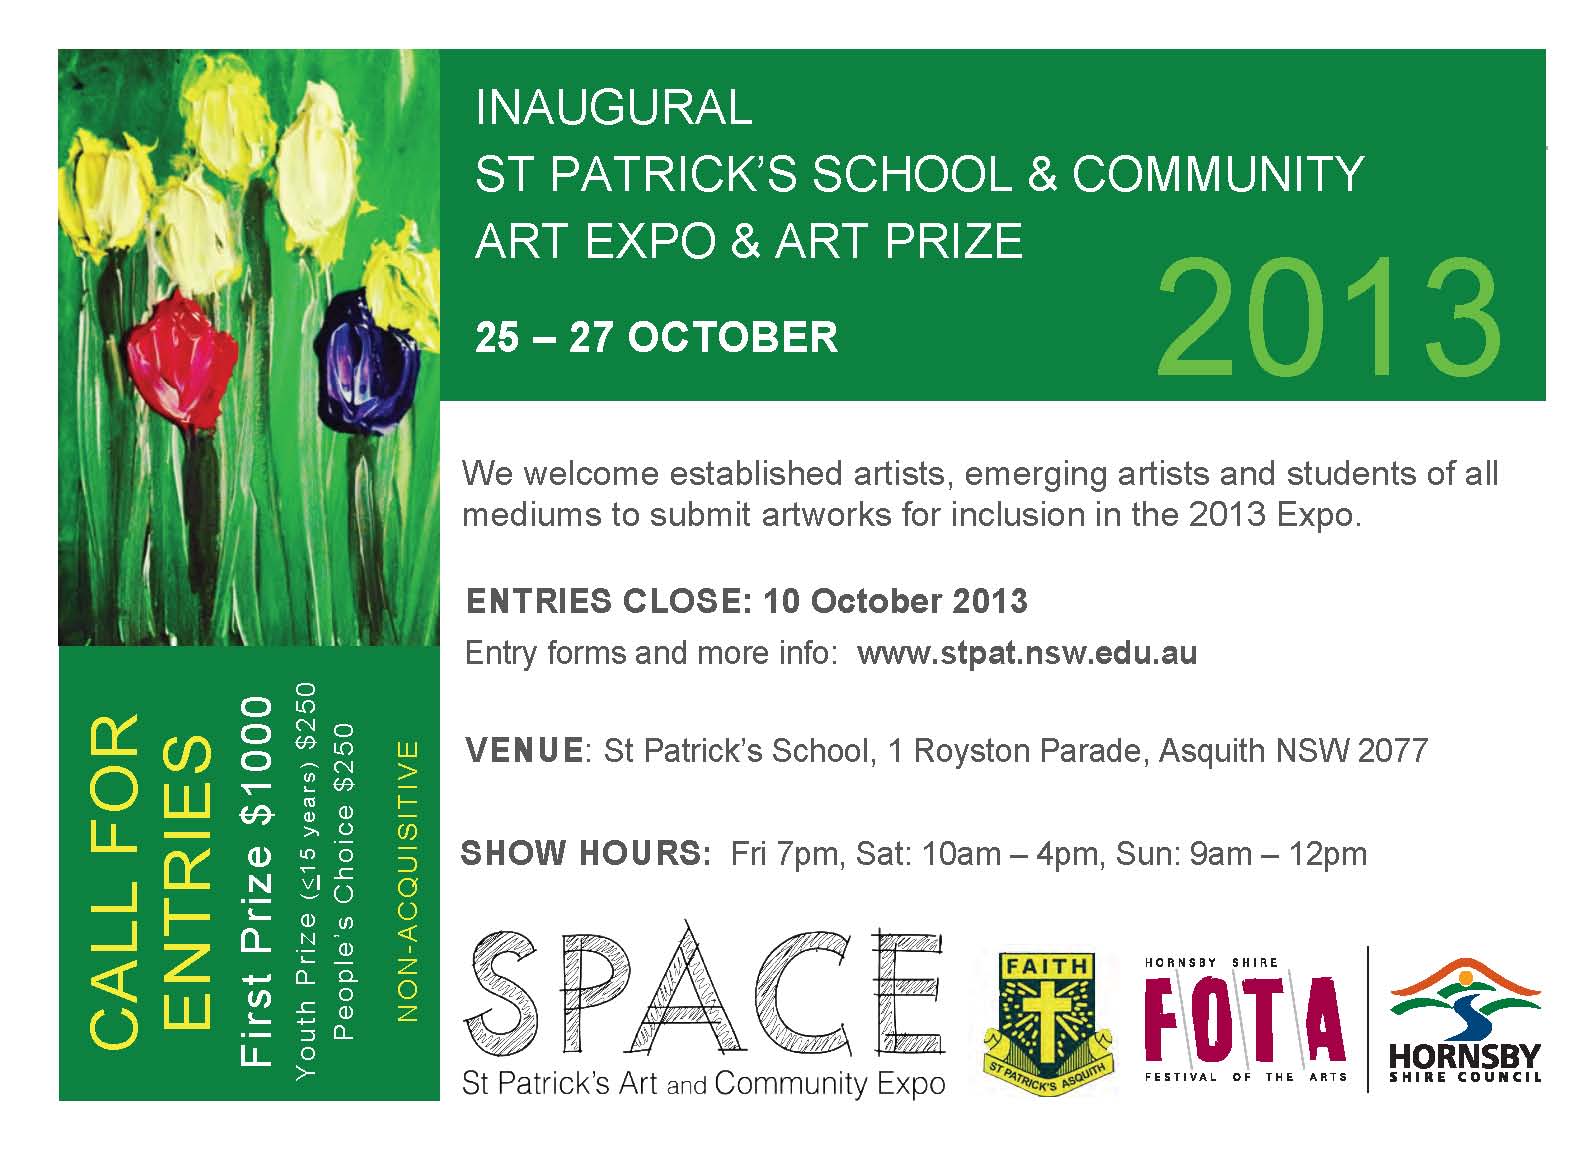 SPACE - St Patrick's School and Community Art Prize and Exhibition